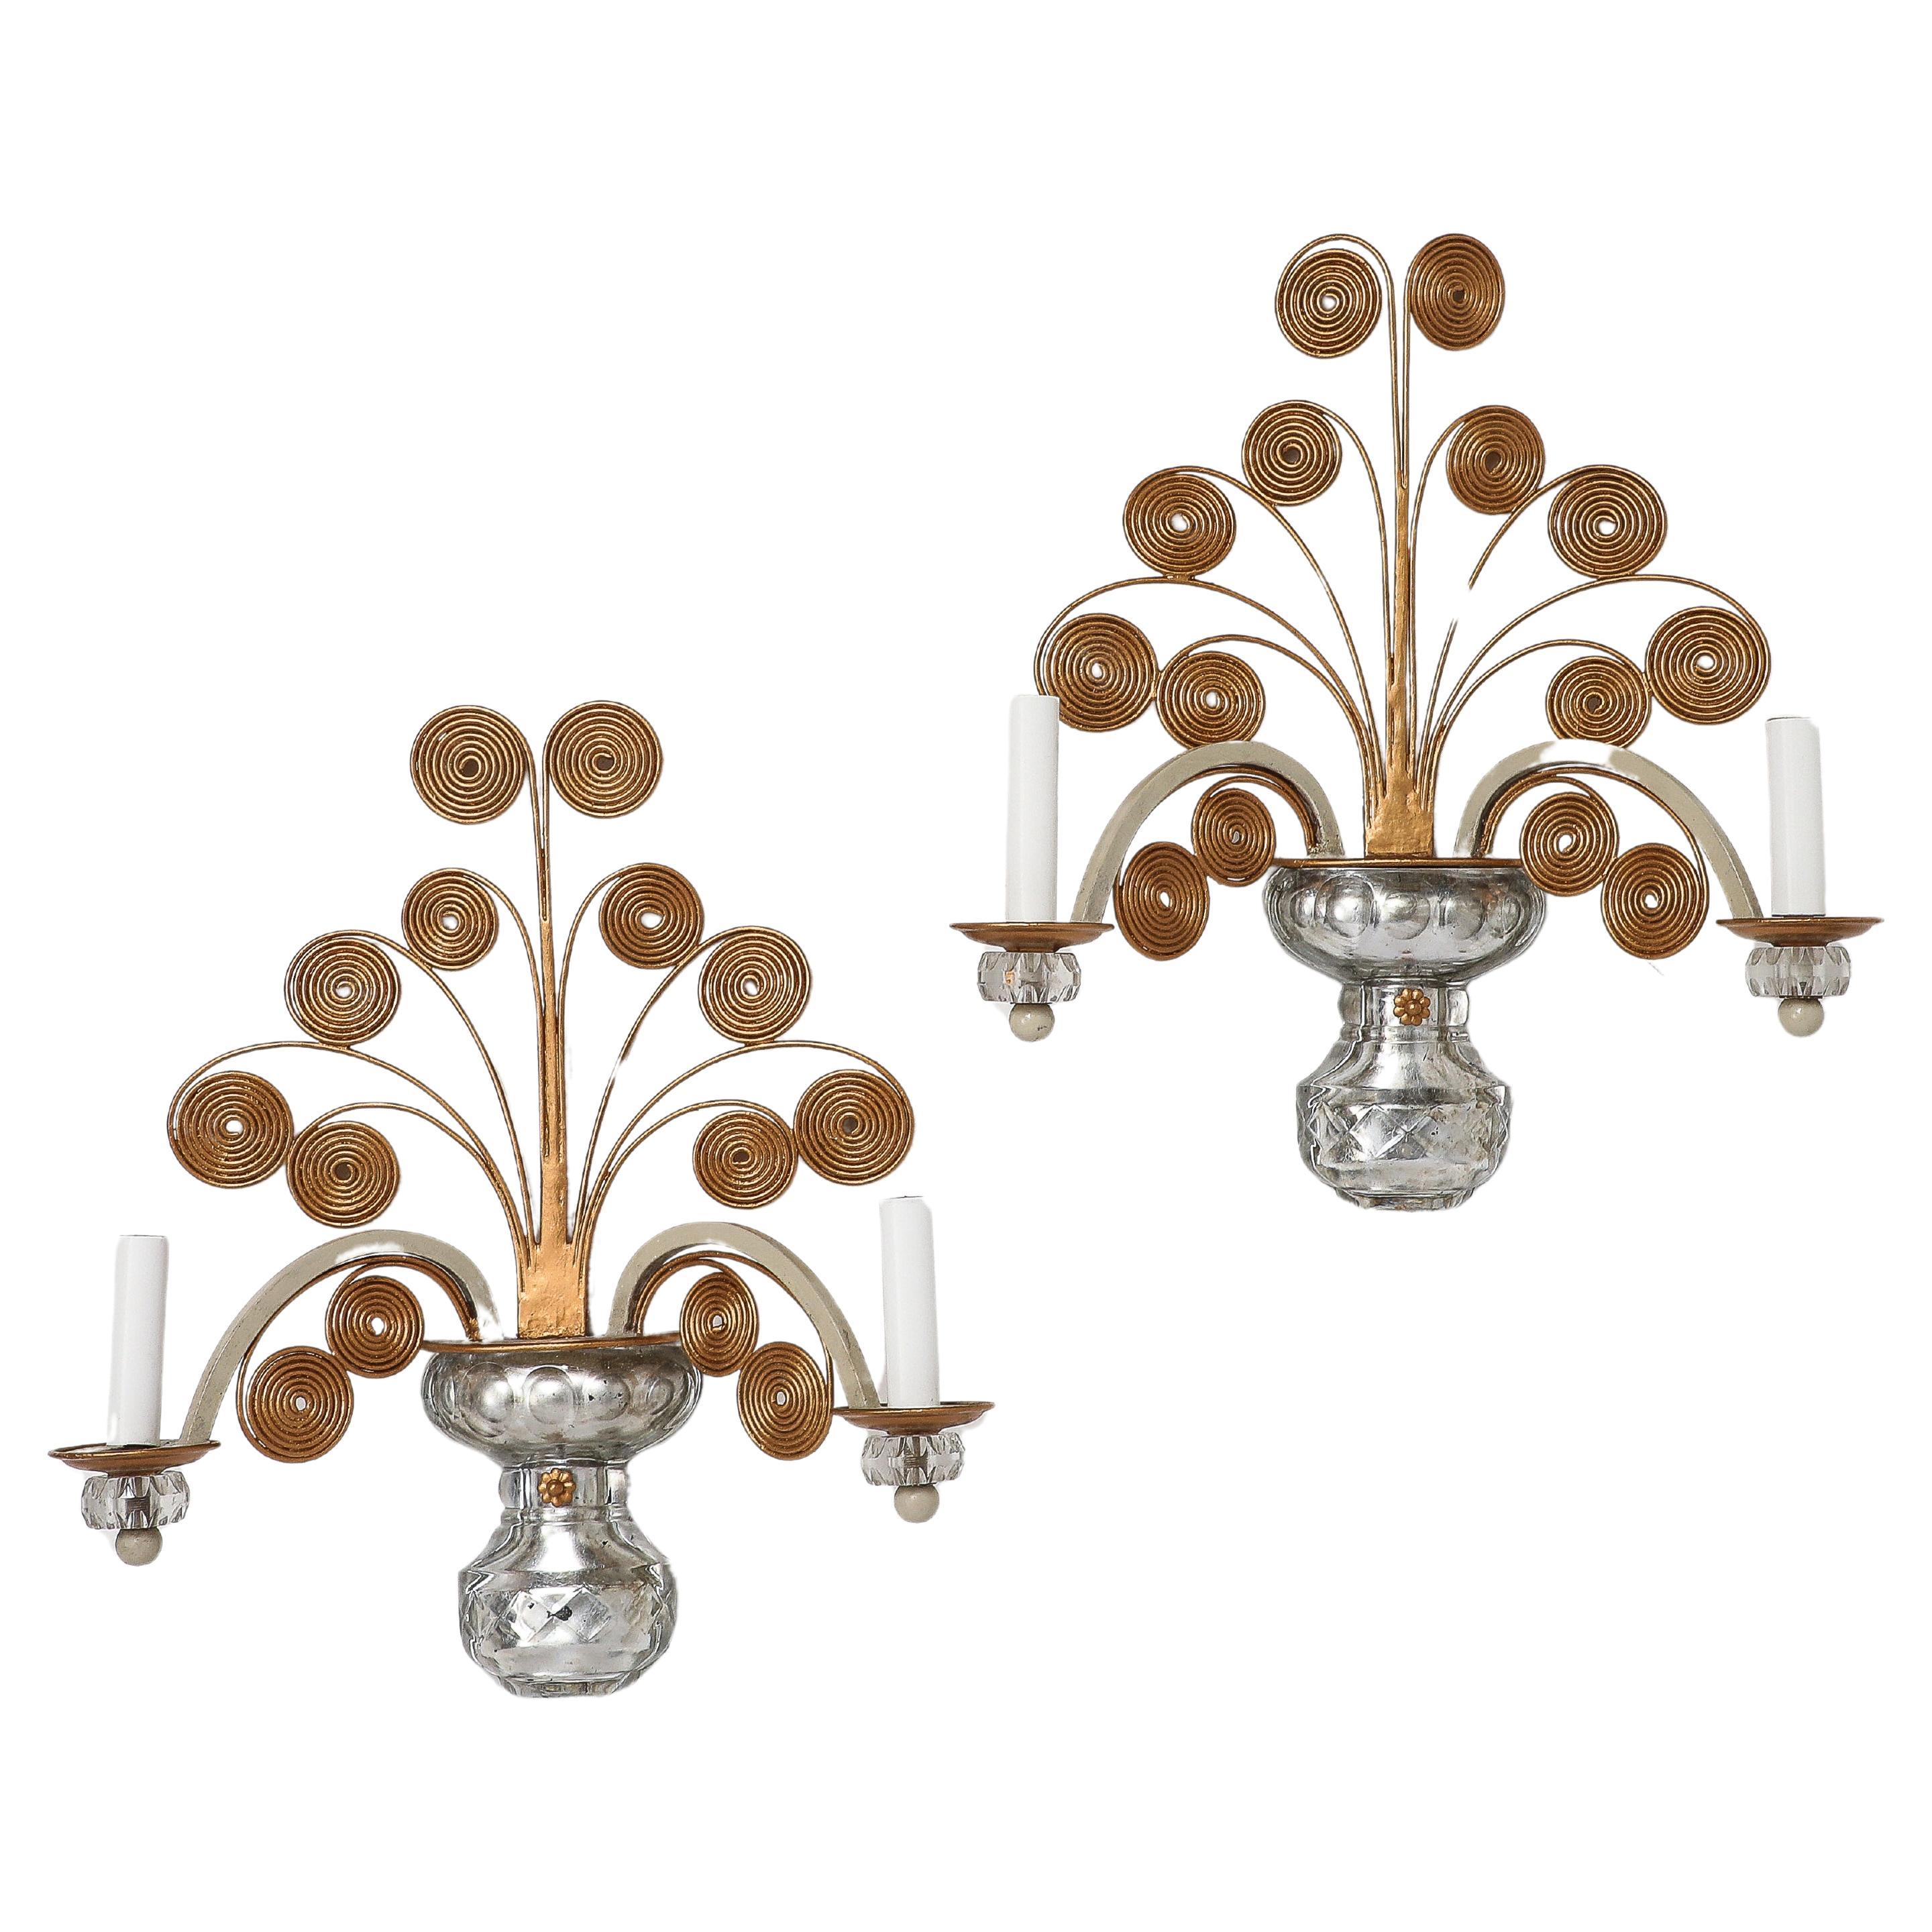 This pair of Banco Firenze Sconces ( one of the sconces has the label on the back) has the esthetics of Bagues sconces. Glass reminded cristal rock and antique finish gold. Each one has 2 lights. The pair has been American wired.